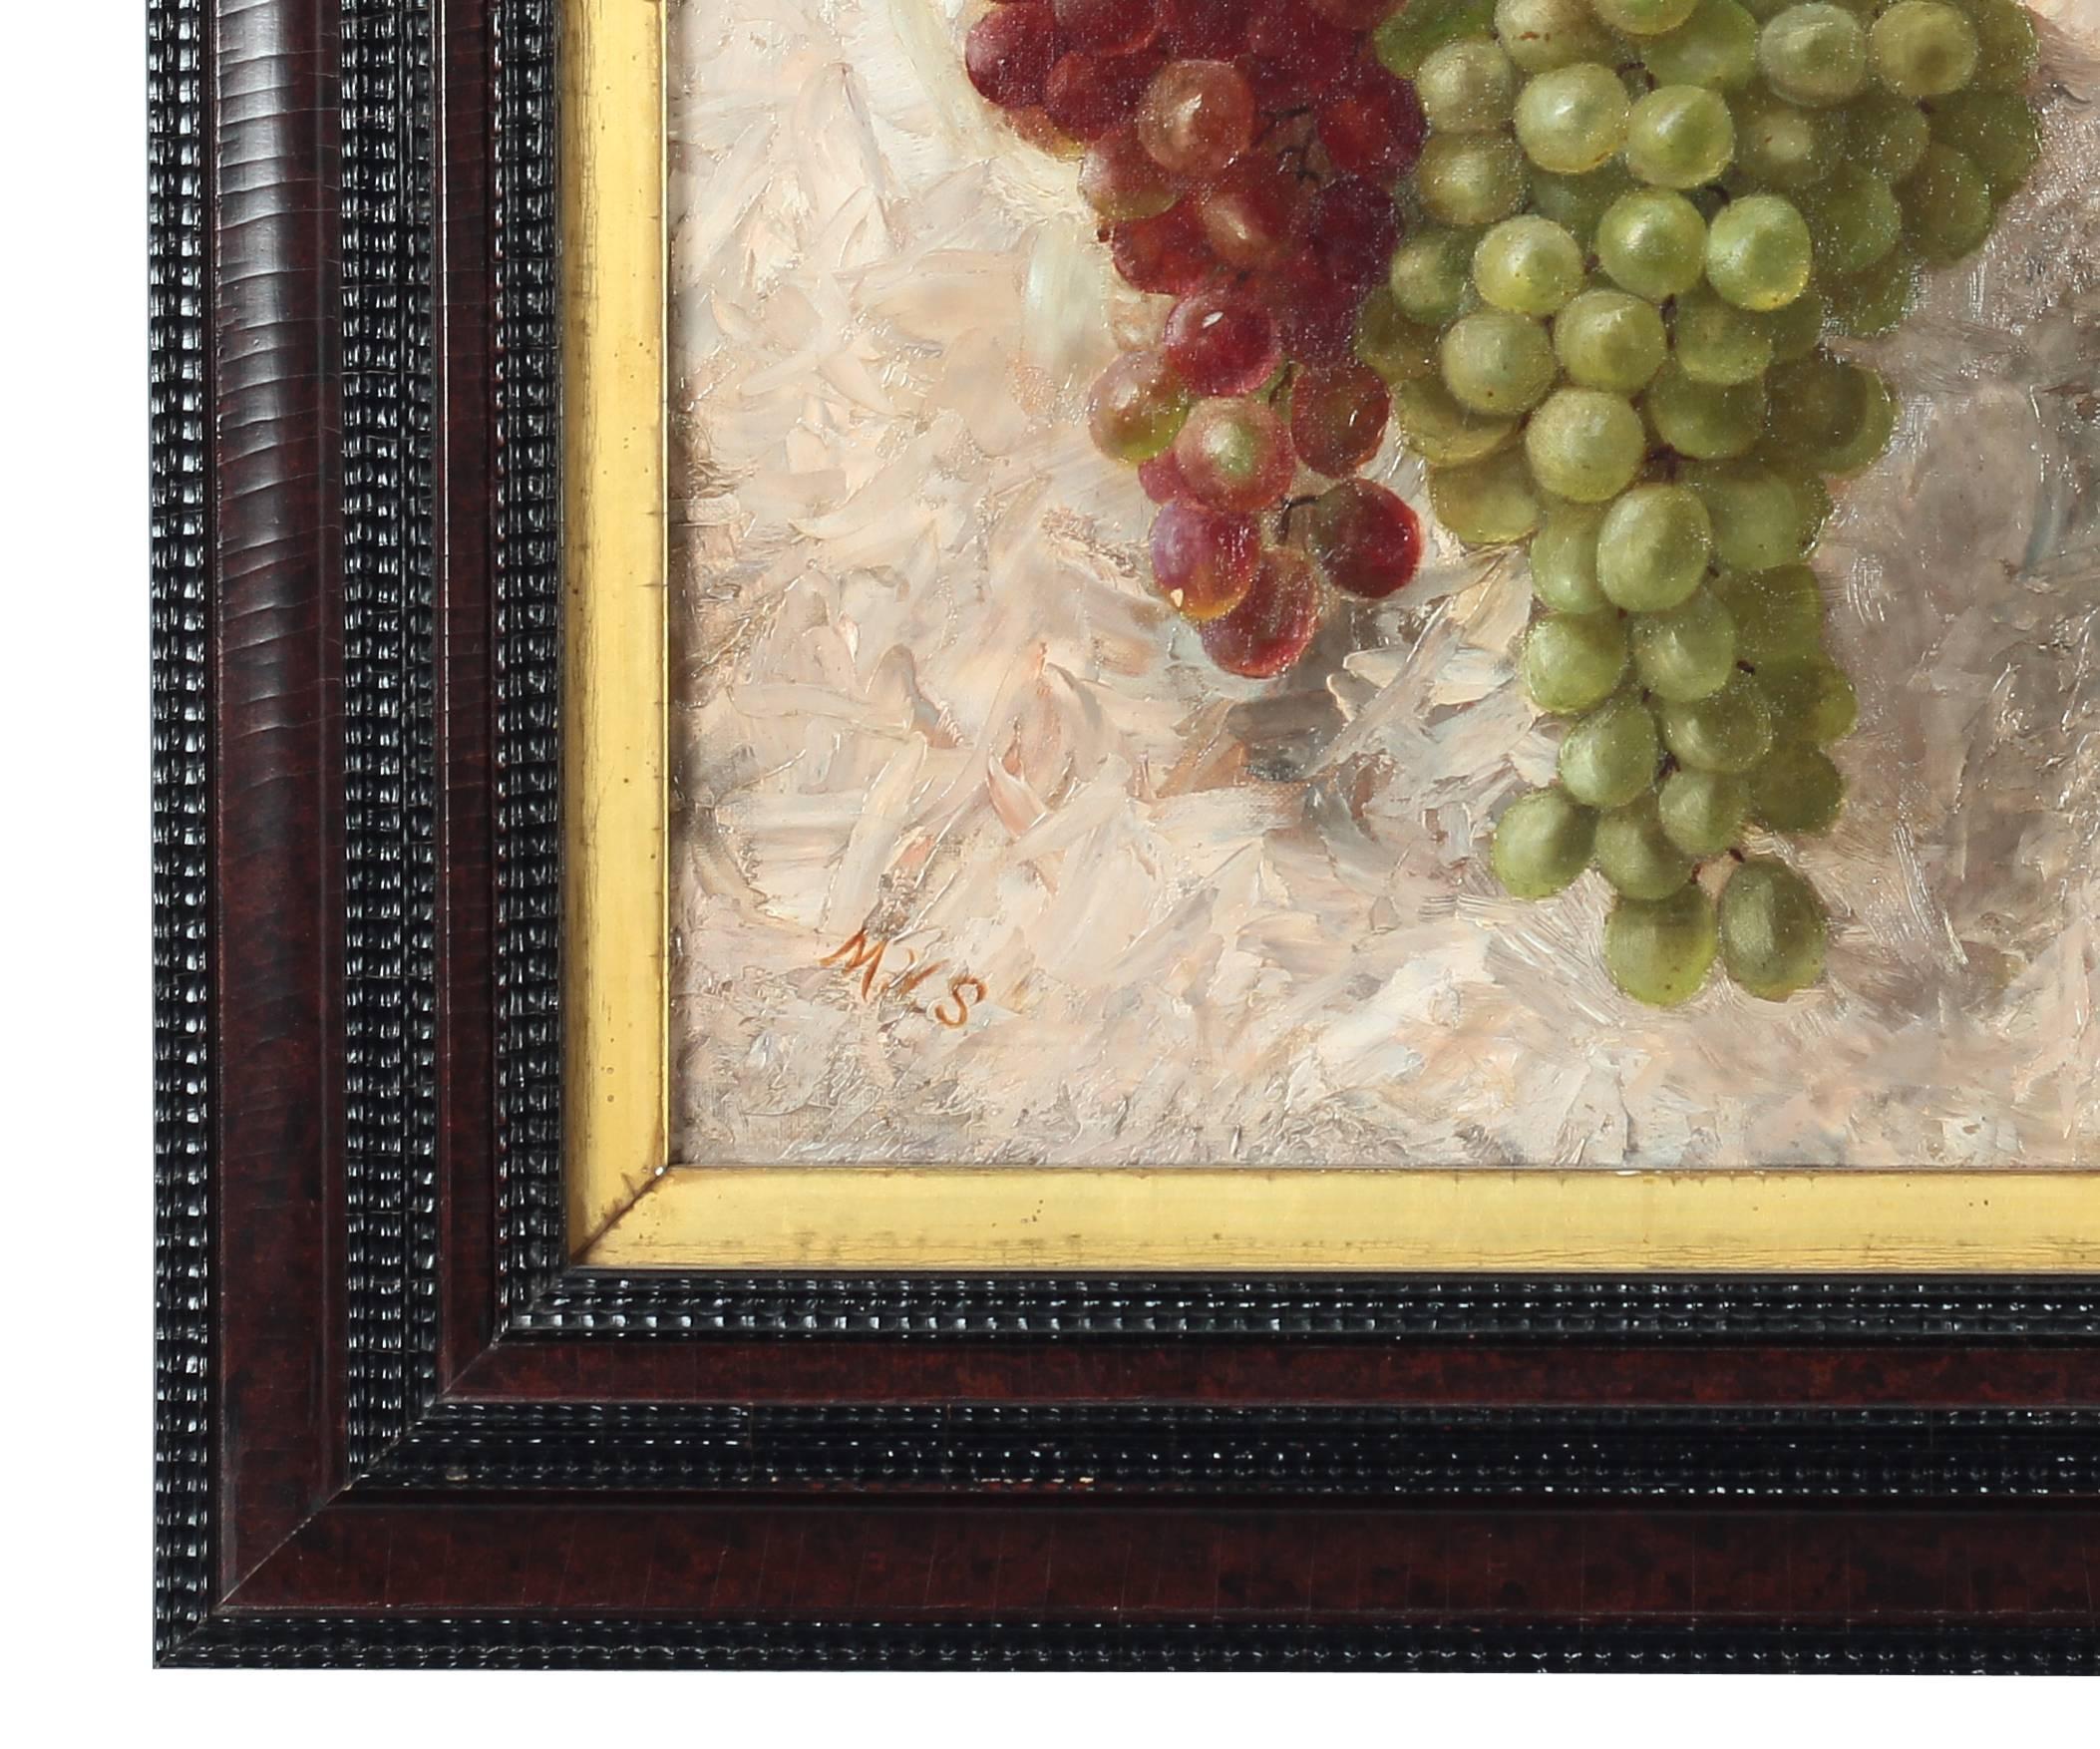 North American Antique American 'Grapes Still Life' Oil on Canvas Painting, 19th Century For Sale